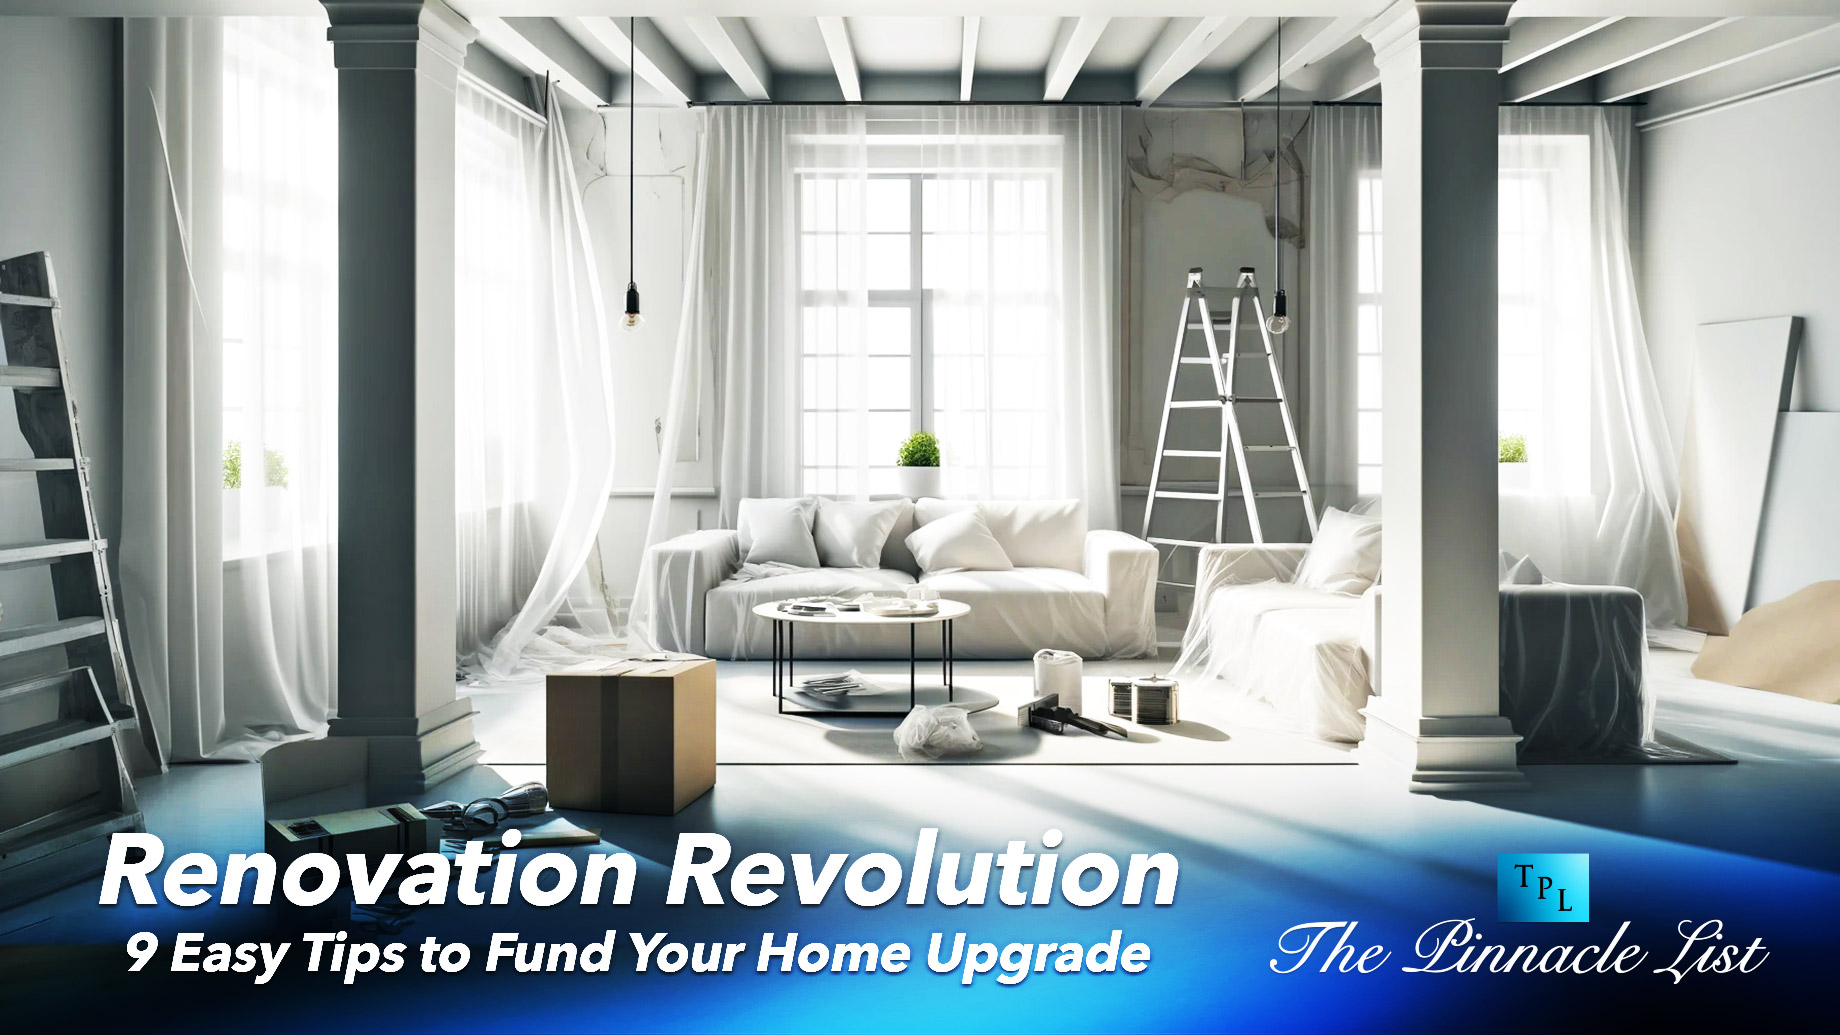 Renovation Revolution: 9 Easy Tips to Fund Your Home Upgrade